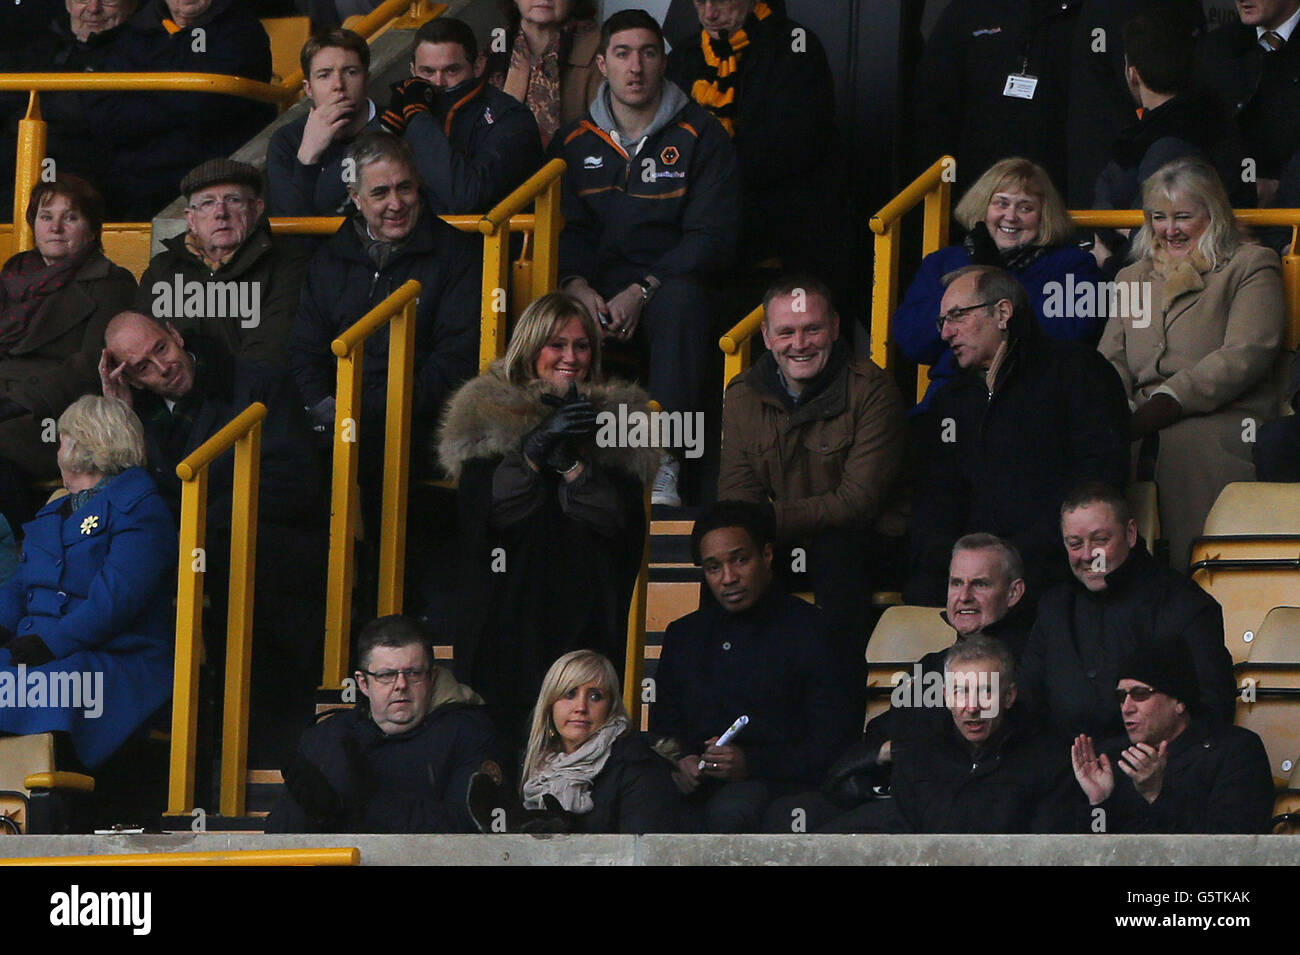 Ex Wolverhampton Wanderers player Paul Ince sits with celebrating wife Claire as their son Thomas Ince scores during the npower Football League Championship match at Molineux, Wolverhampton. Stock Photo